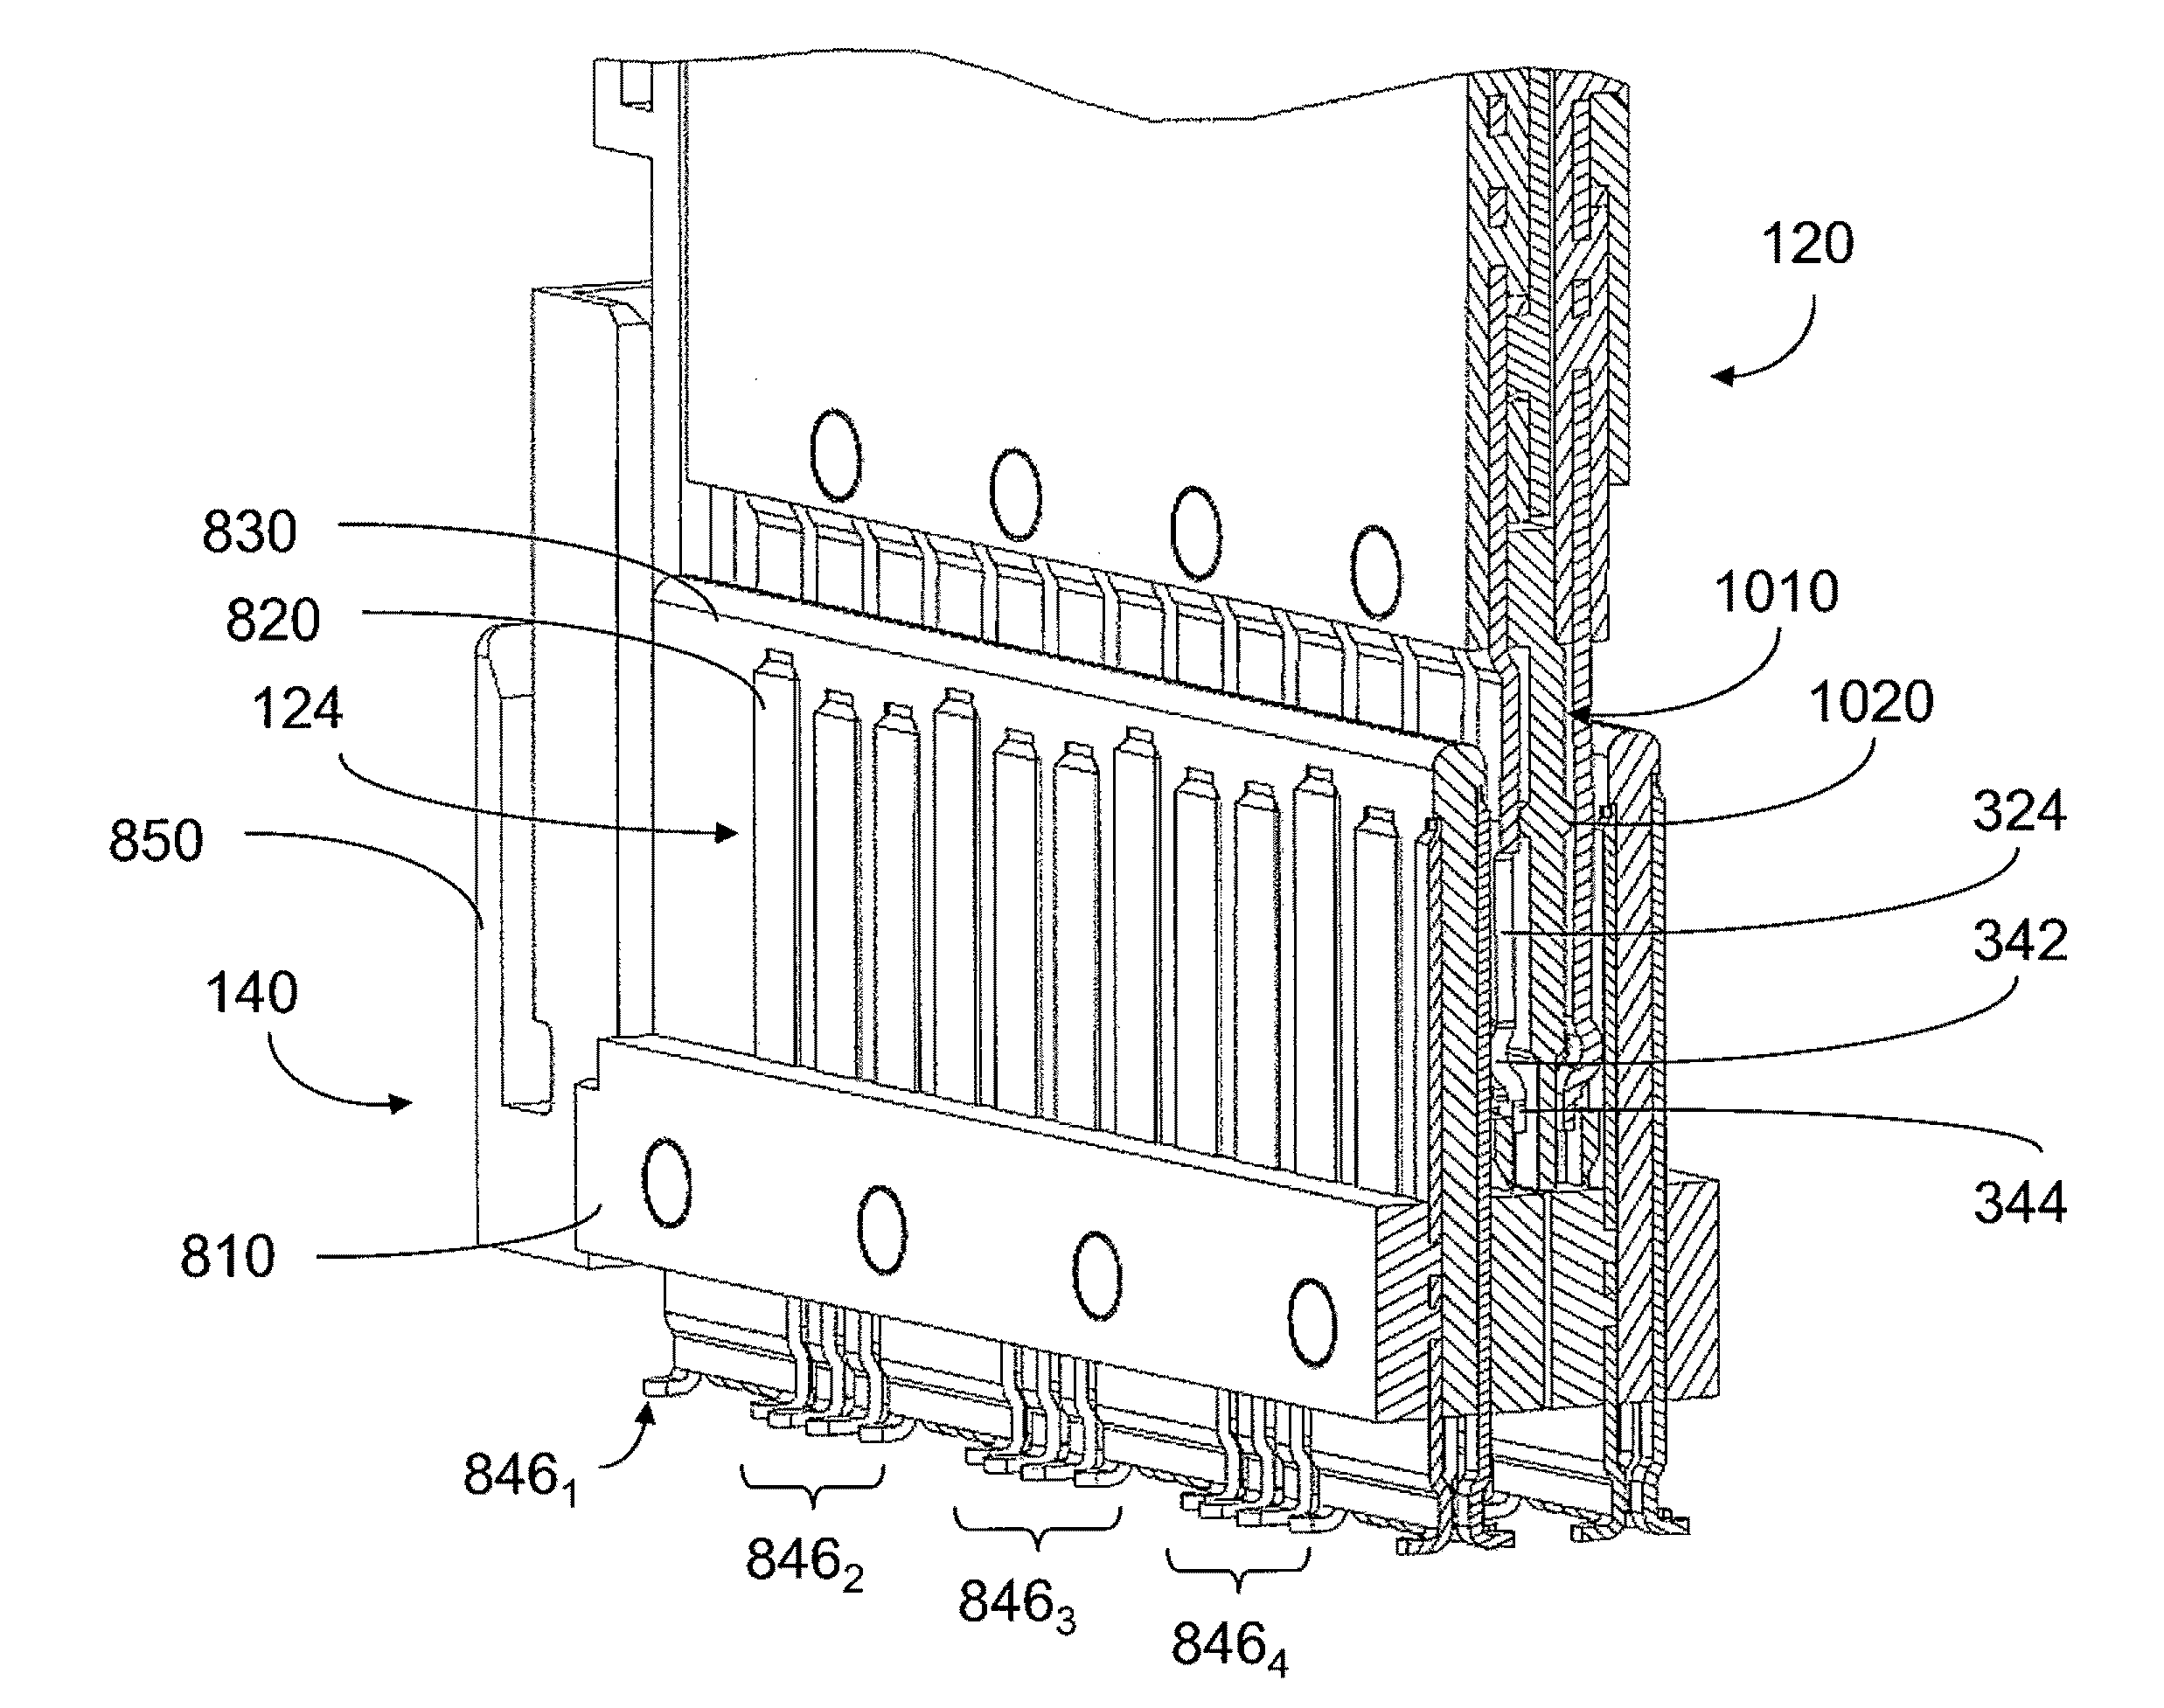 High density electrical connector and PCB footprint